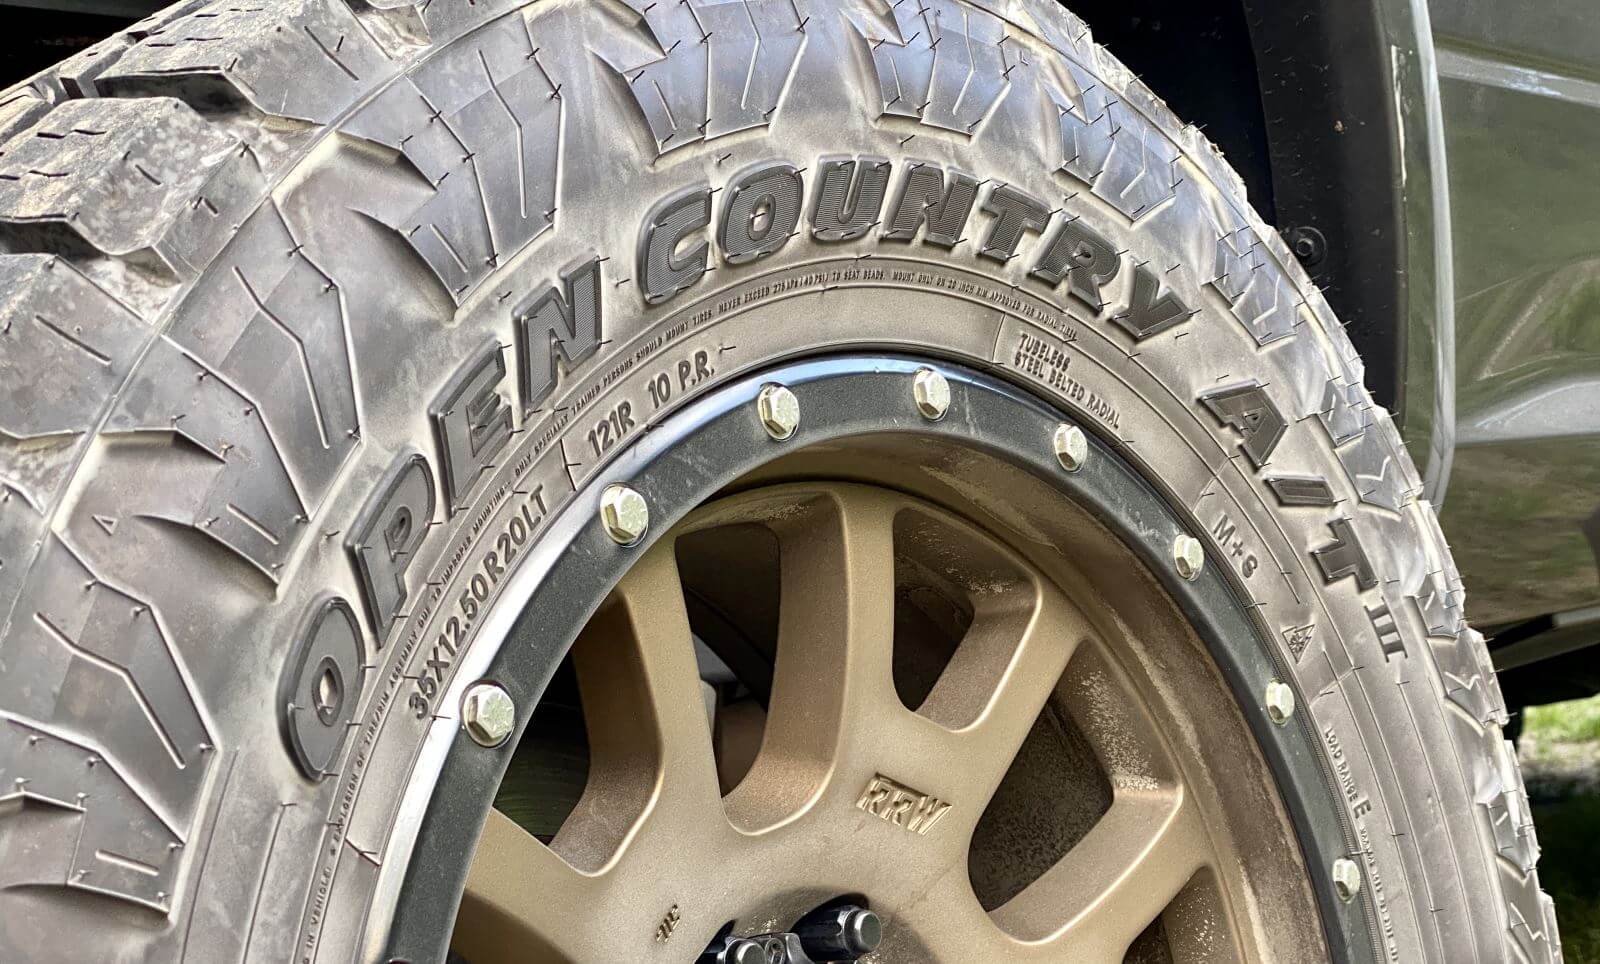 TOYO® OPEN COUNTRY A/T III - 285/70R17